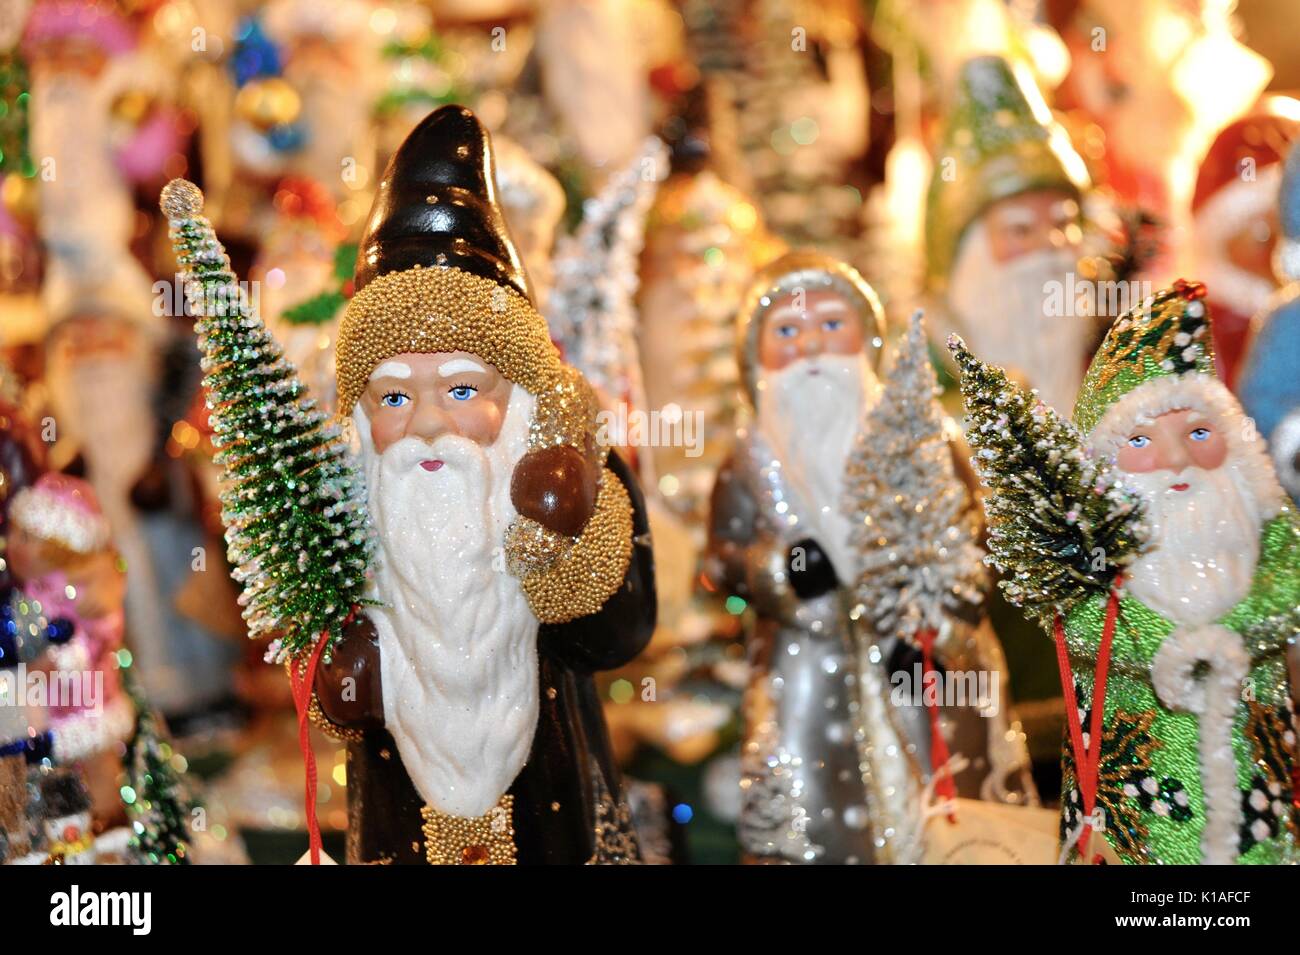 Close-up, hand-decorated European Father Christmas and Santa figurines/ornaments, holding Christmas tree at Old World Christmas Market Osthoff Resort. Stock Photo